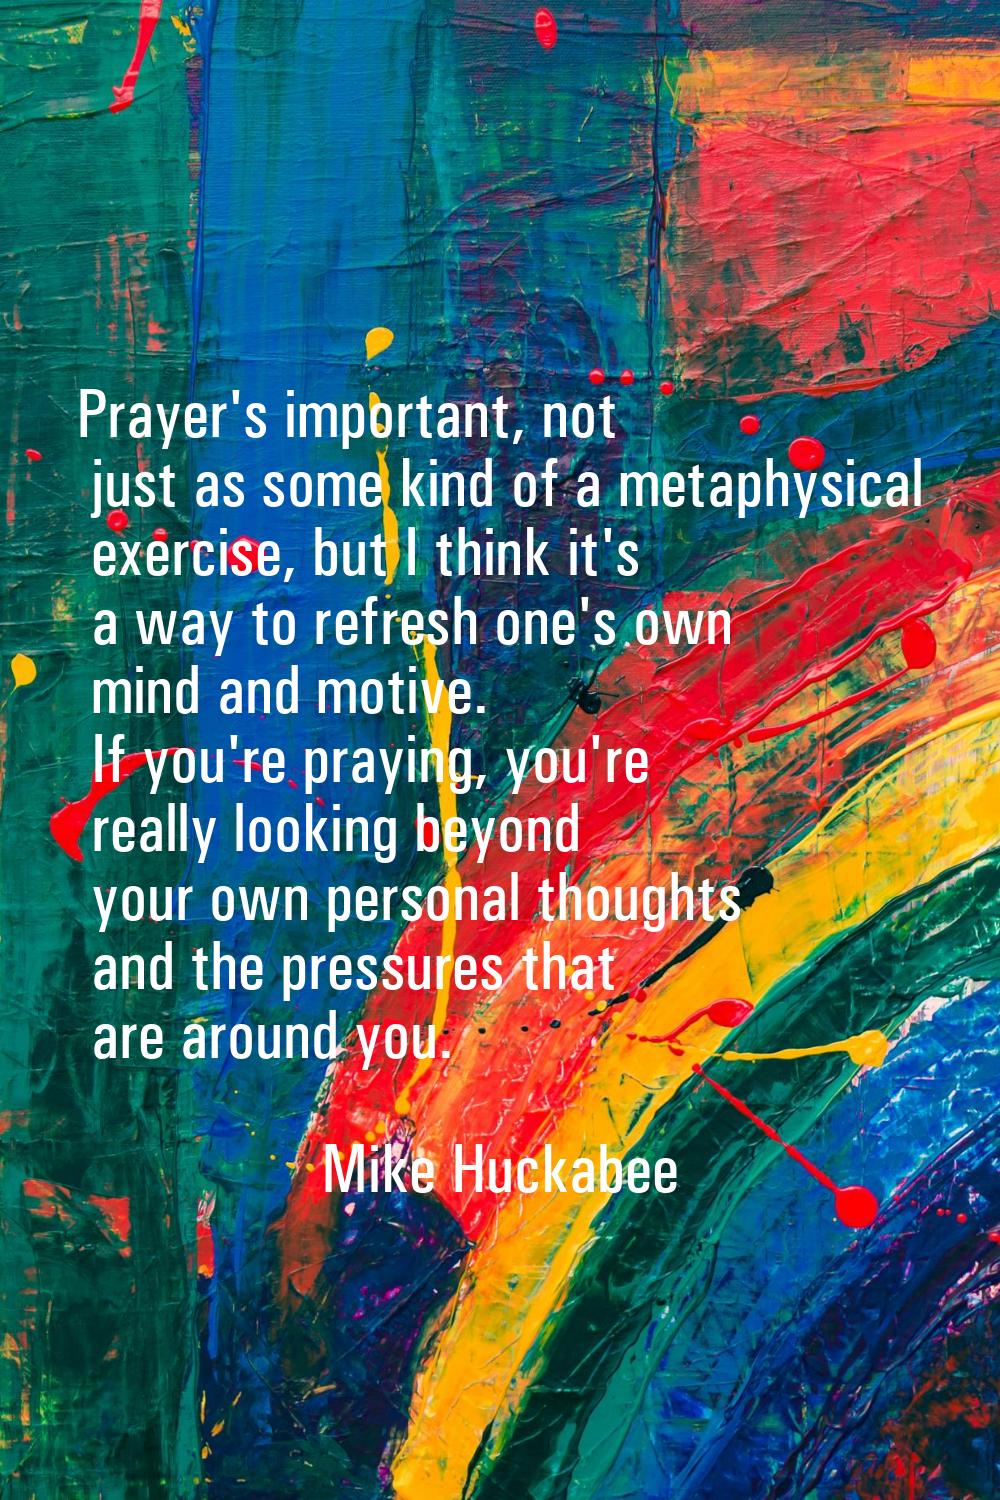 Prayer's important, not just as some kind of a metaphysical exercise, but I think it's a way to ref